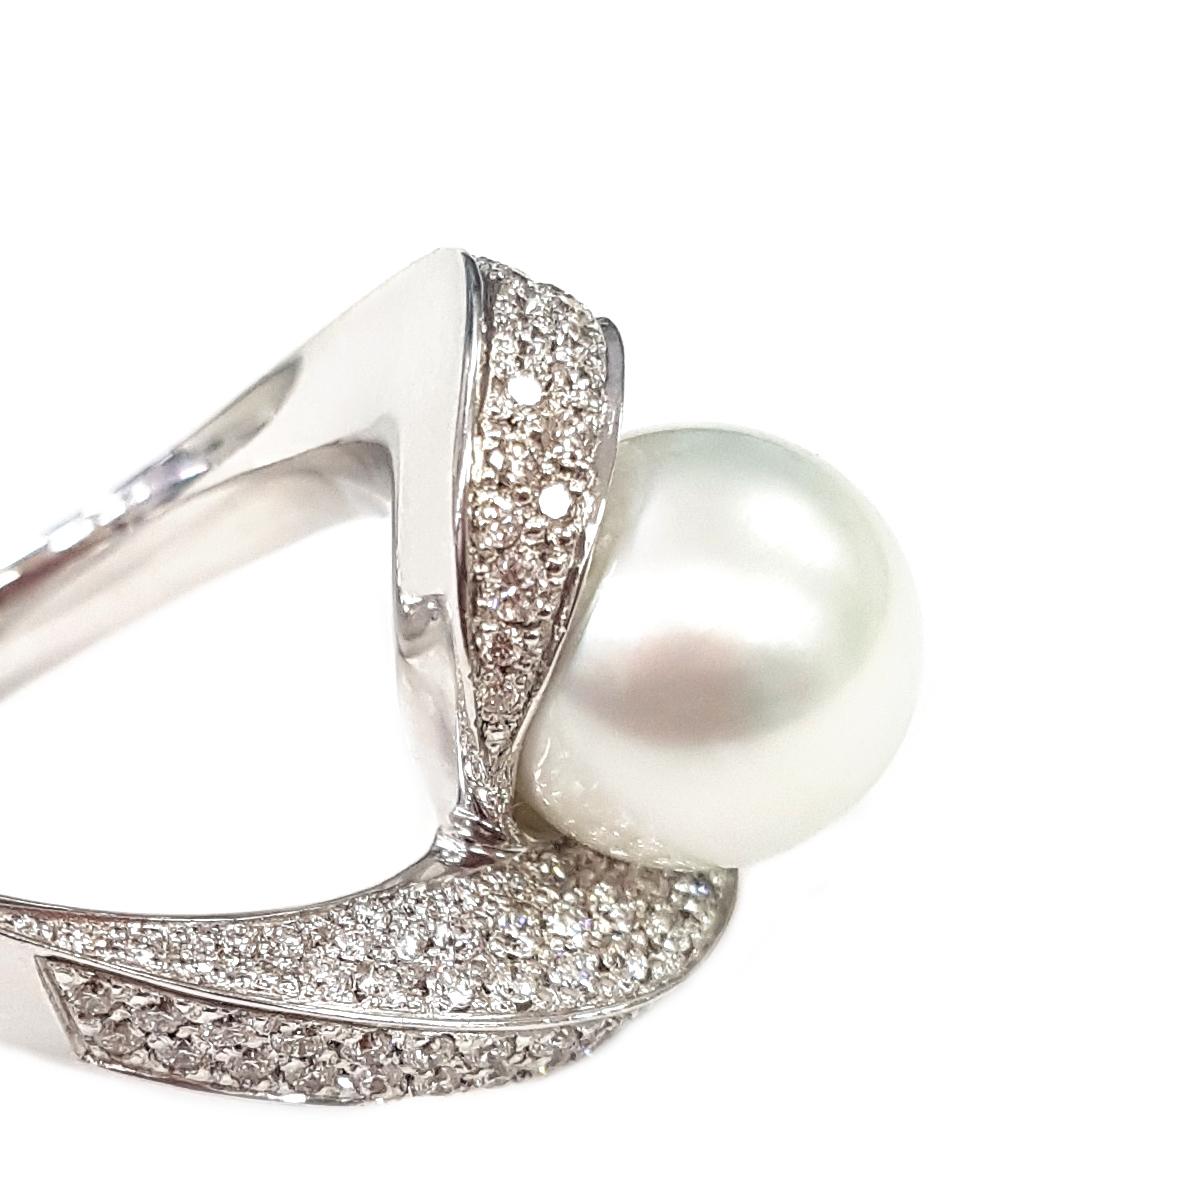 An elegant cocktail ring masterfully created entirely by hand from 18-karat white gold and featuring a 10-carat Australian pearl which appears to balance atop a pair of spiralling arms set with white diamonds totalling 1.14 carats. 

The top of the